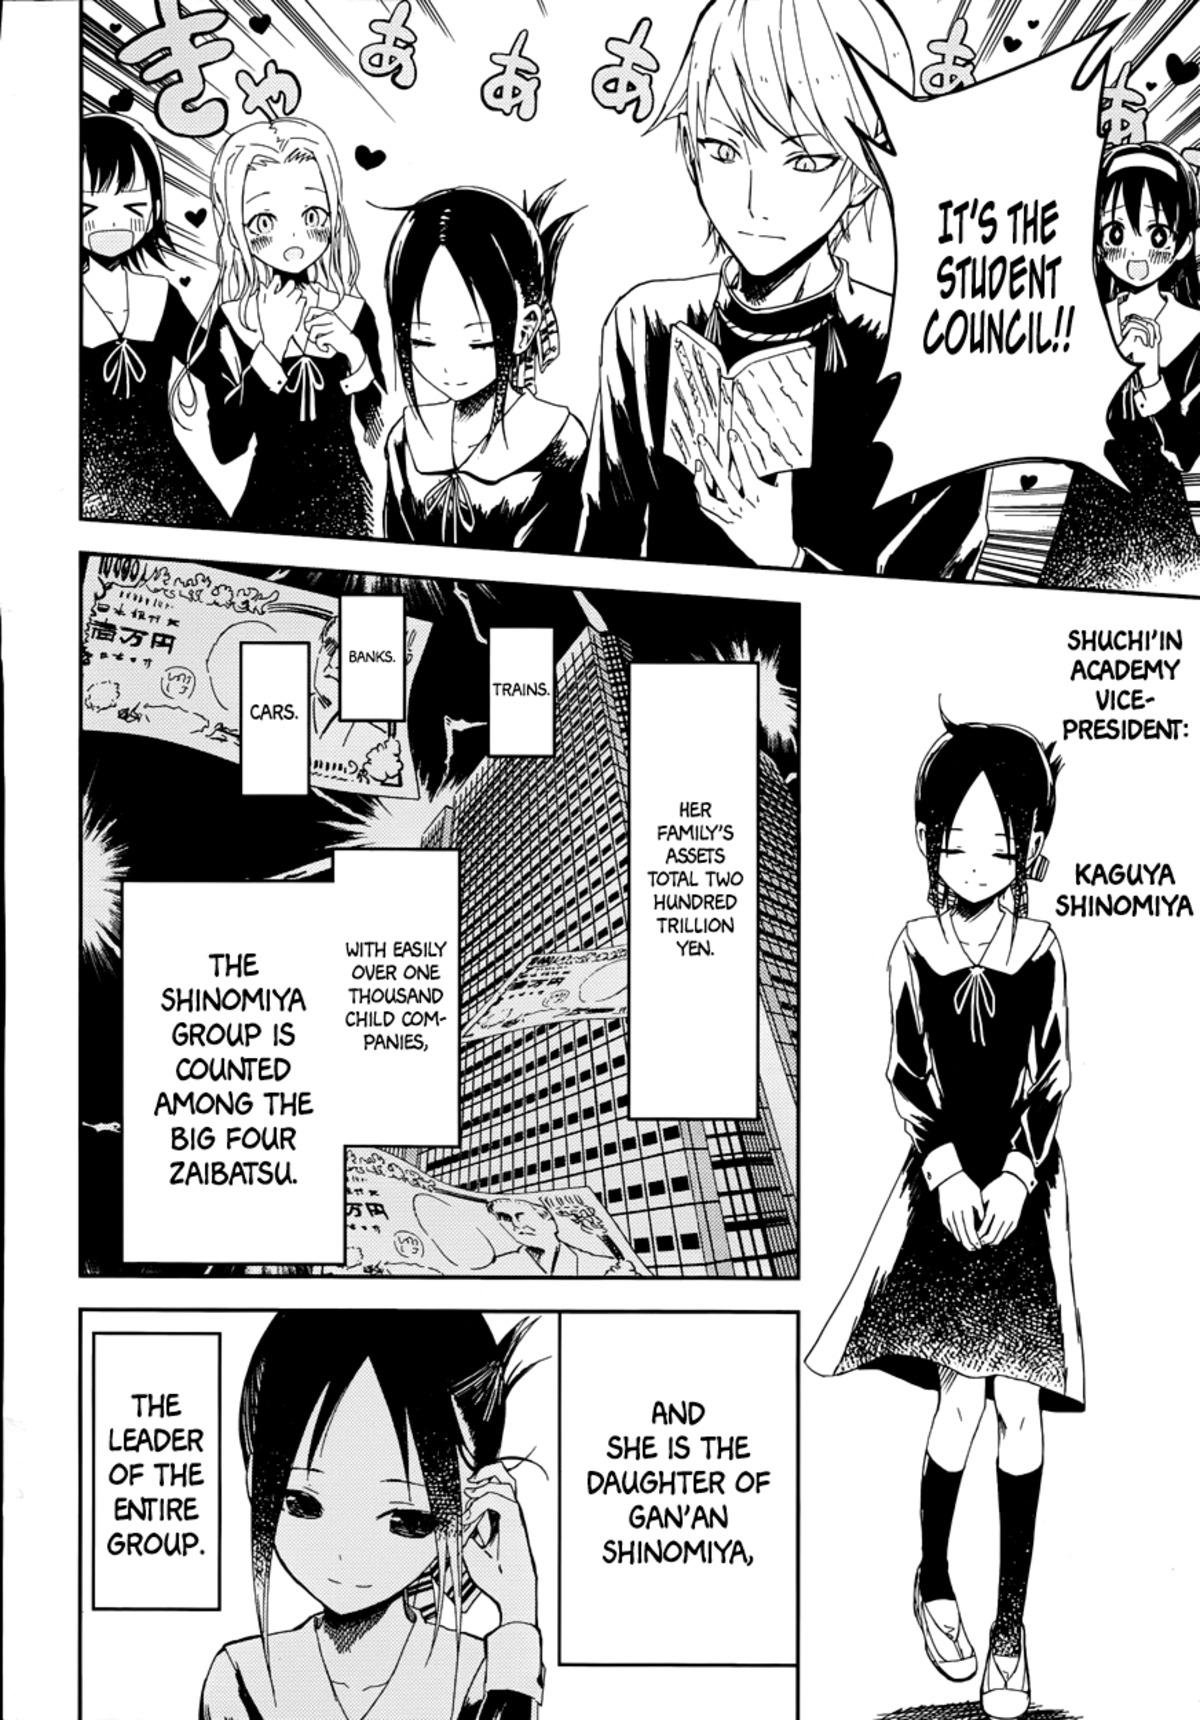 ▲ Miyuki Shirogane (left) earned the respect of those around him through his diligent studies and rose to the top of the school, becoming President of the Student Council. The beautiful and completely flawless Kaguya Shinomiya (right) is accomplished in both academics and sports, and to top it off, her family runs a giant conglomerate. The story revolves around these two protagonists.